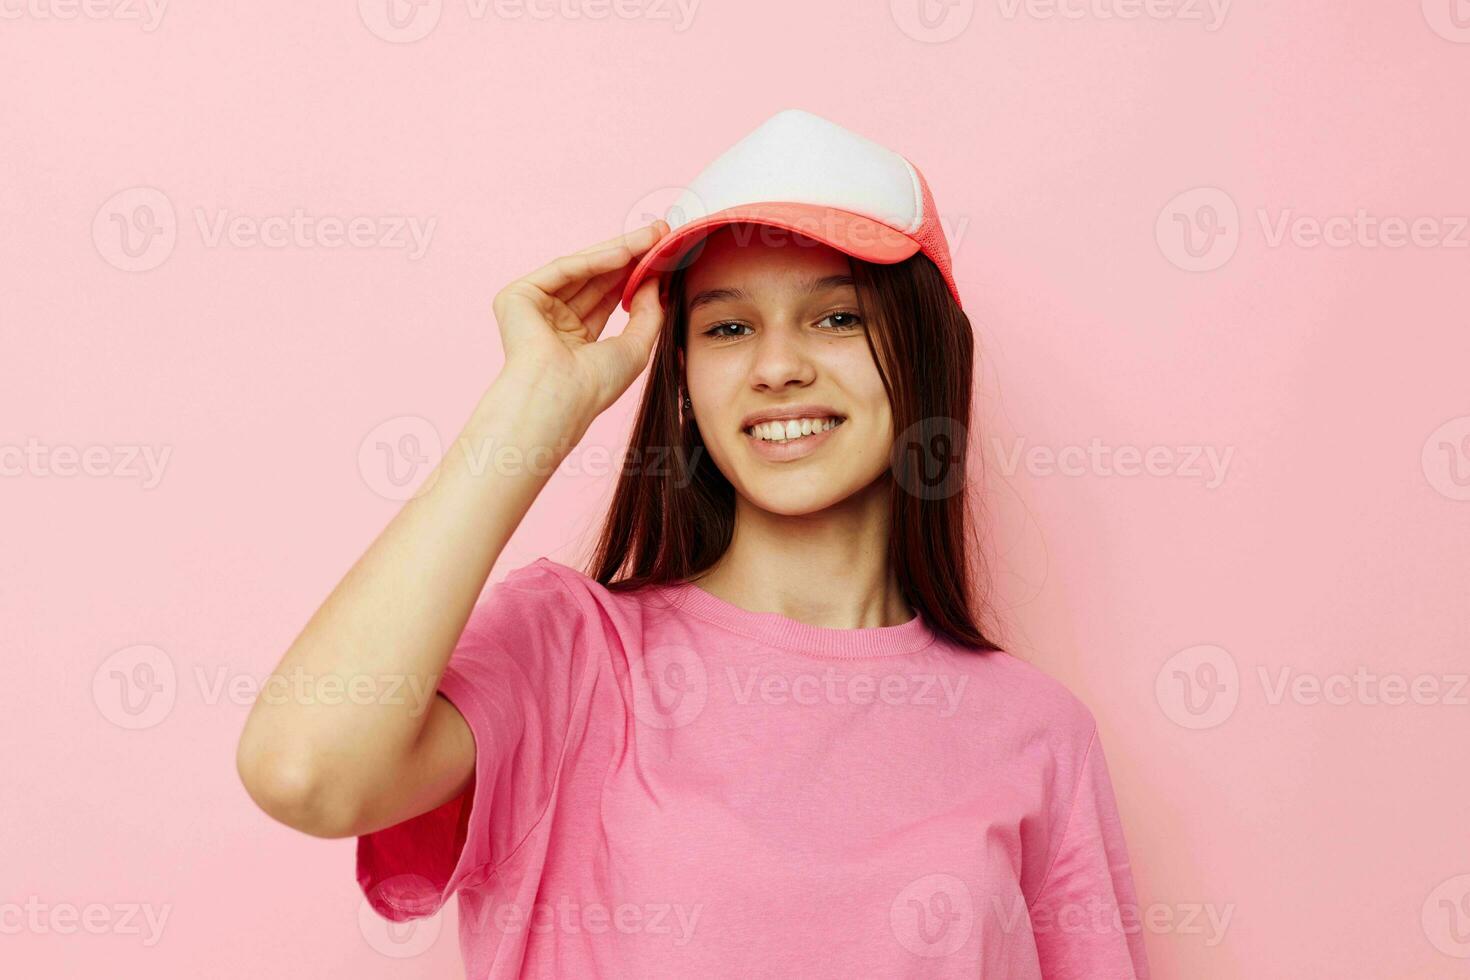 young girl in a pink t-shirt with a cap on her head casual wear photo